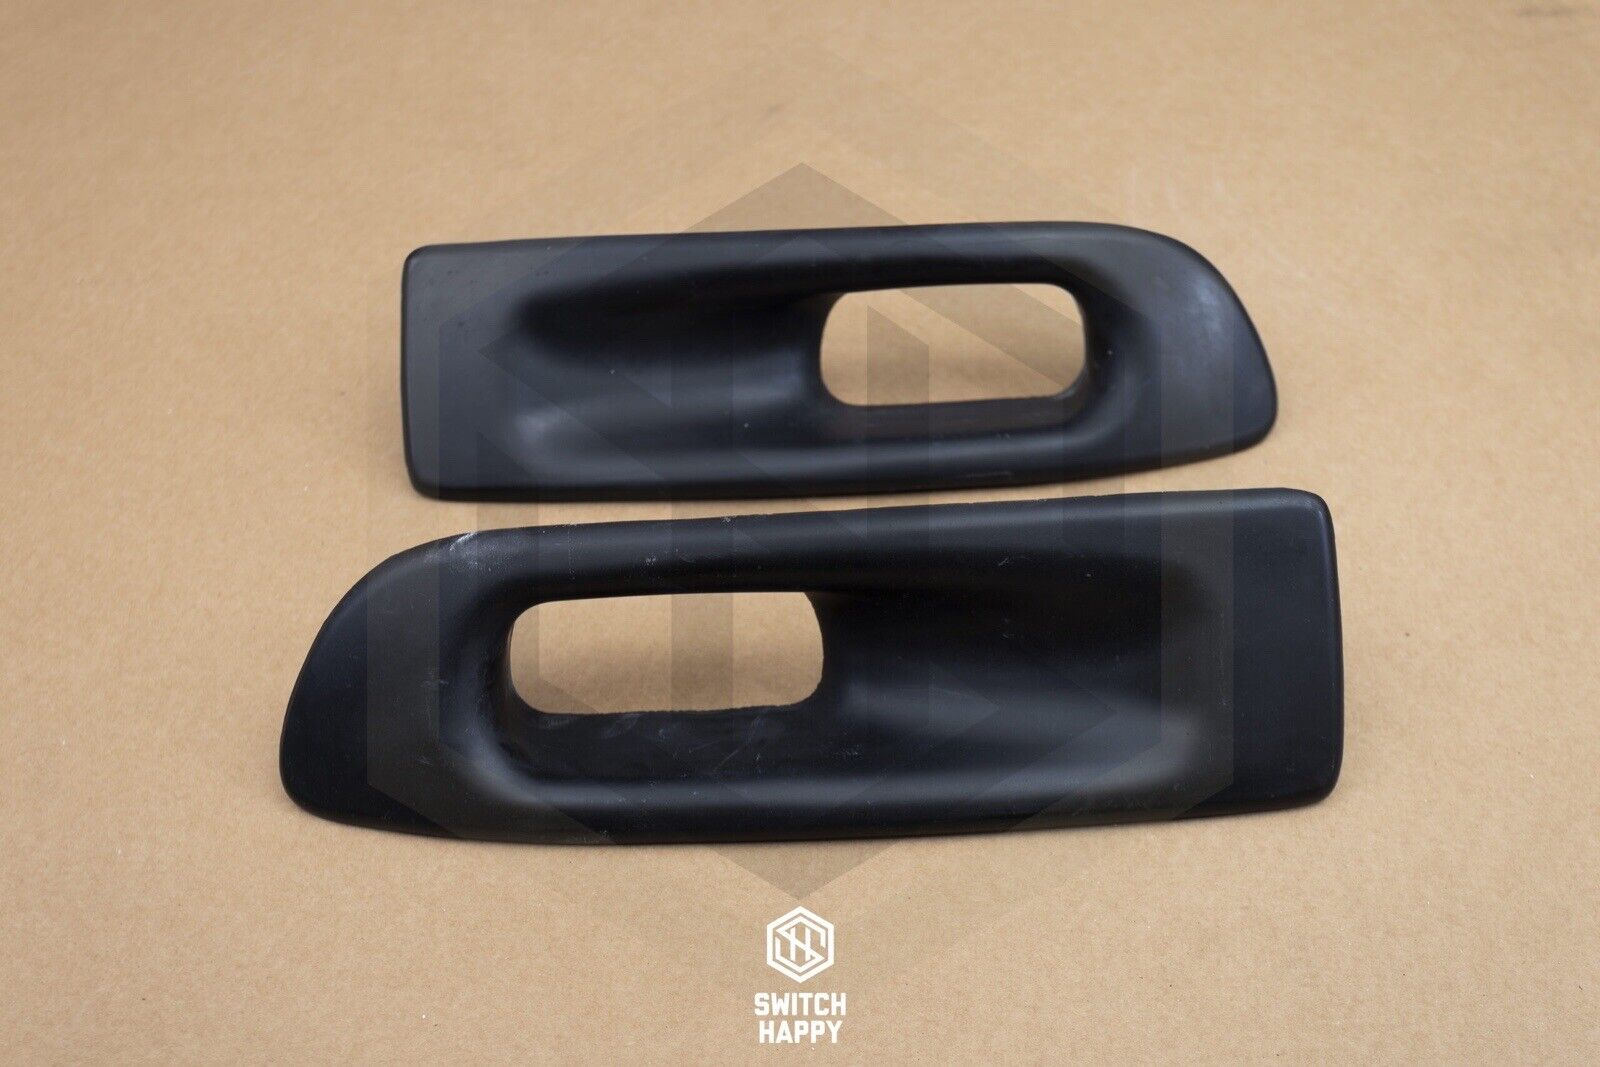 Vw Bora Mk4 Bumper Grills ducts Air Intake Vents Ducts FK style